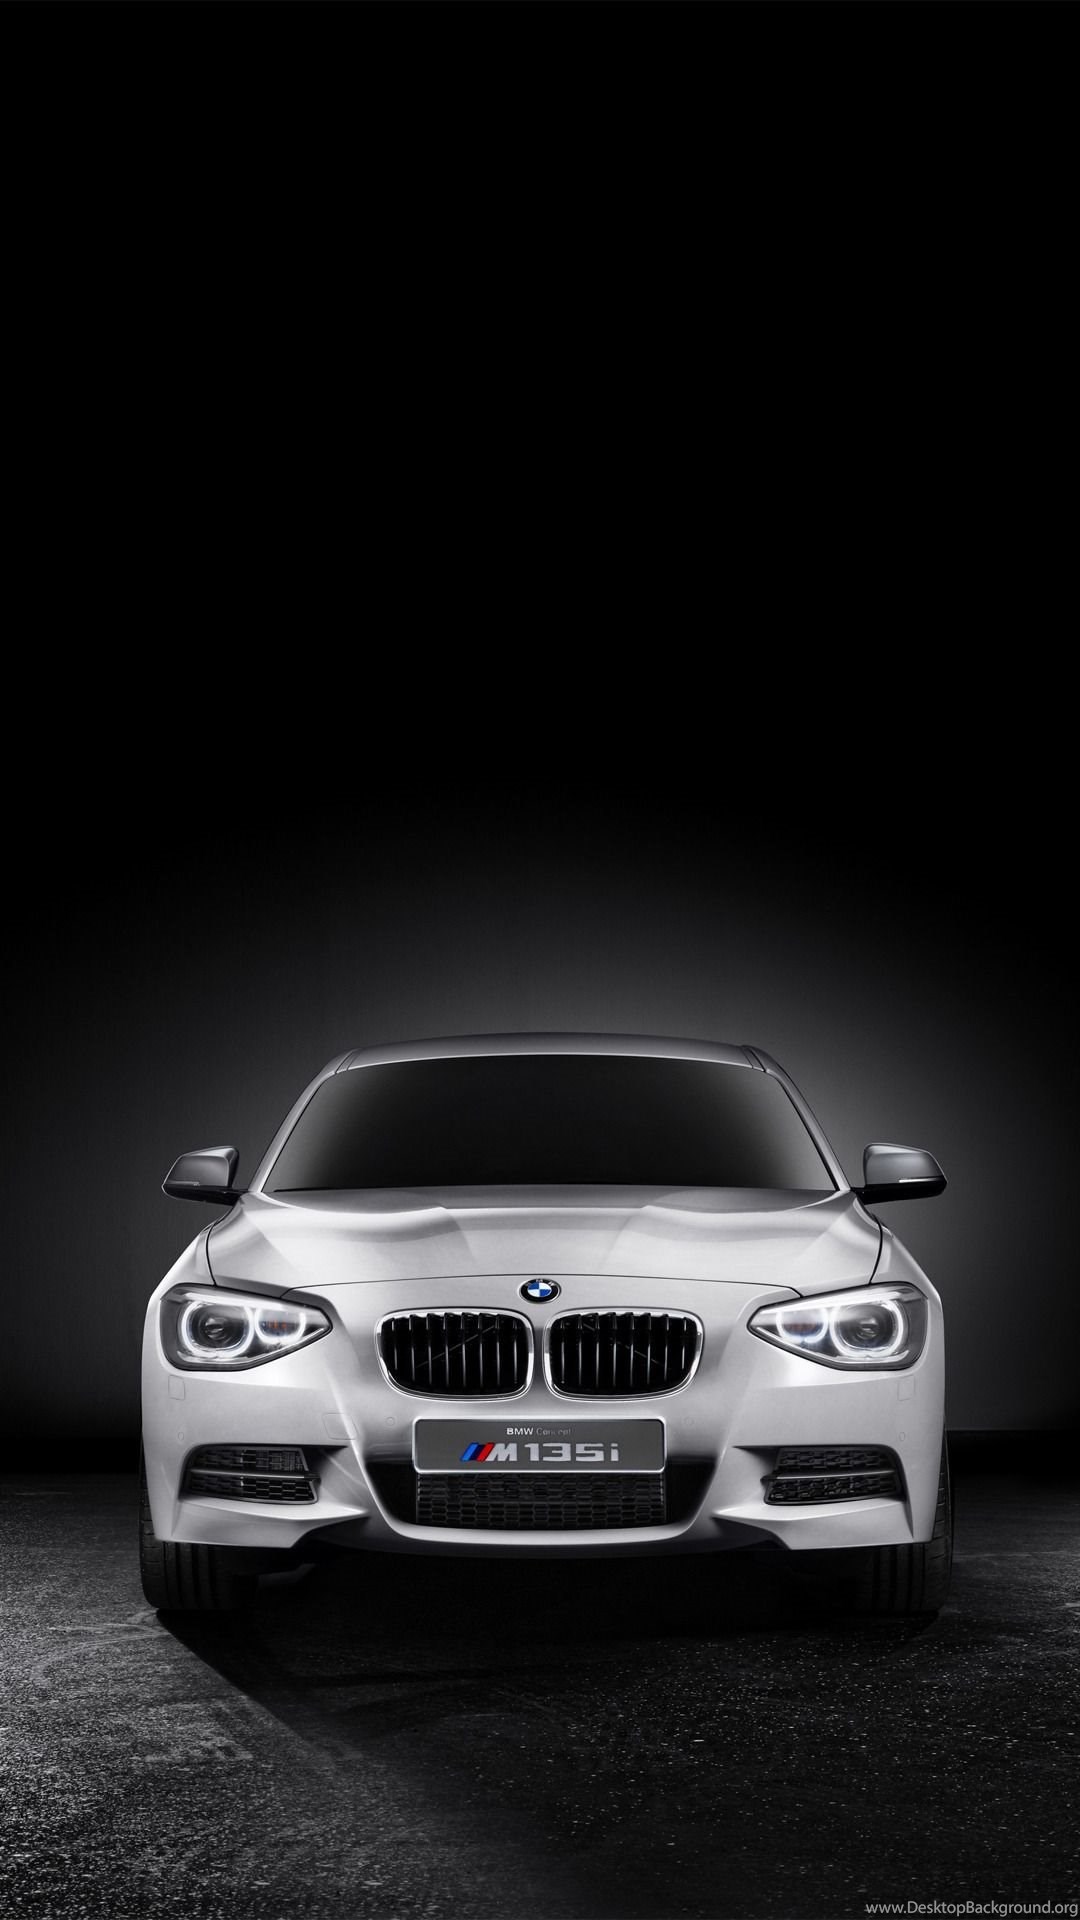 20 Bmw Wallpapers For Mobile Pics Picture Idokeren